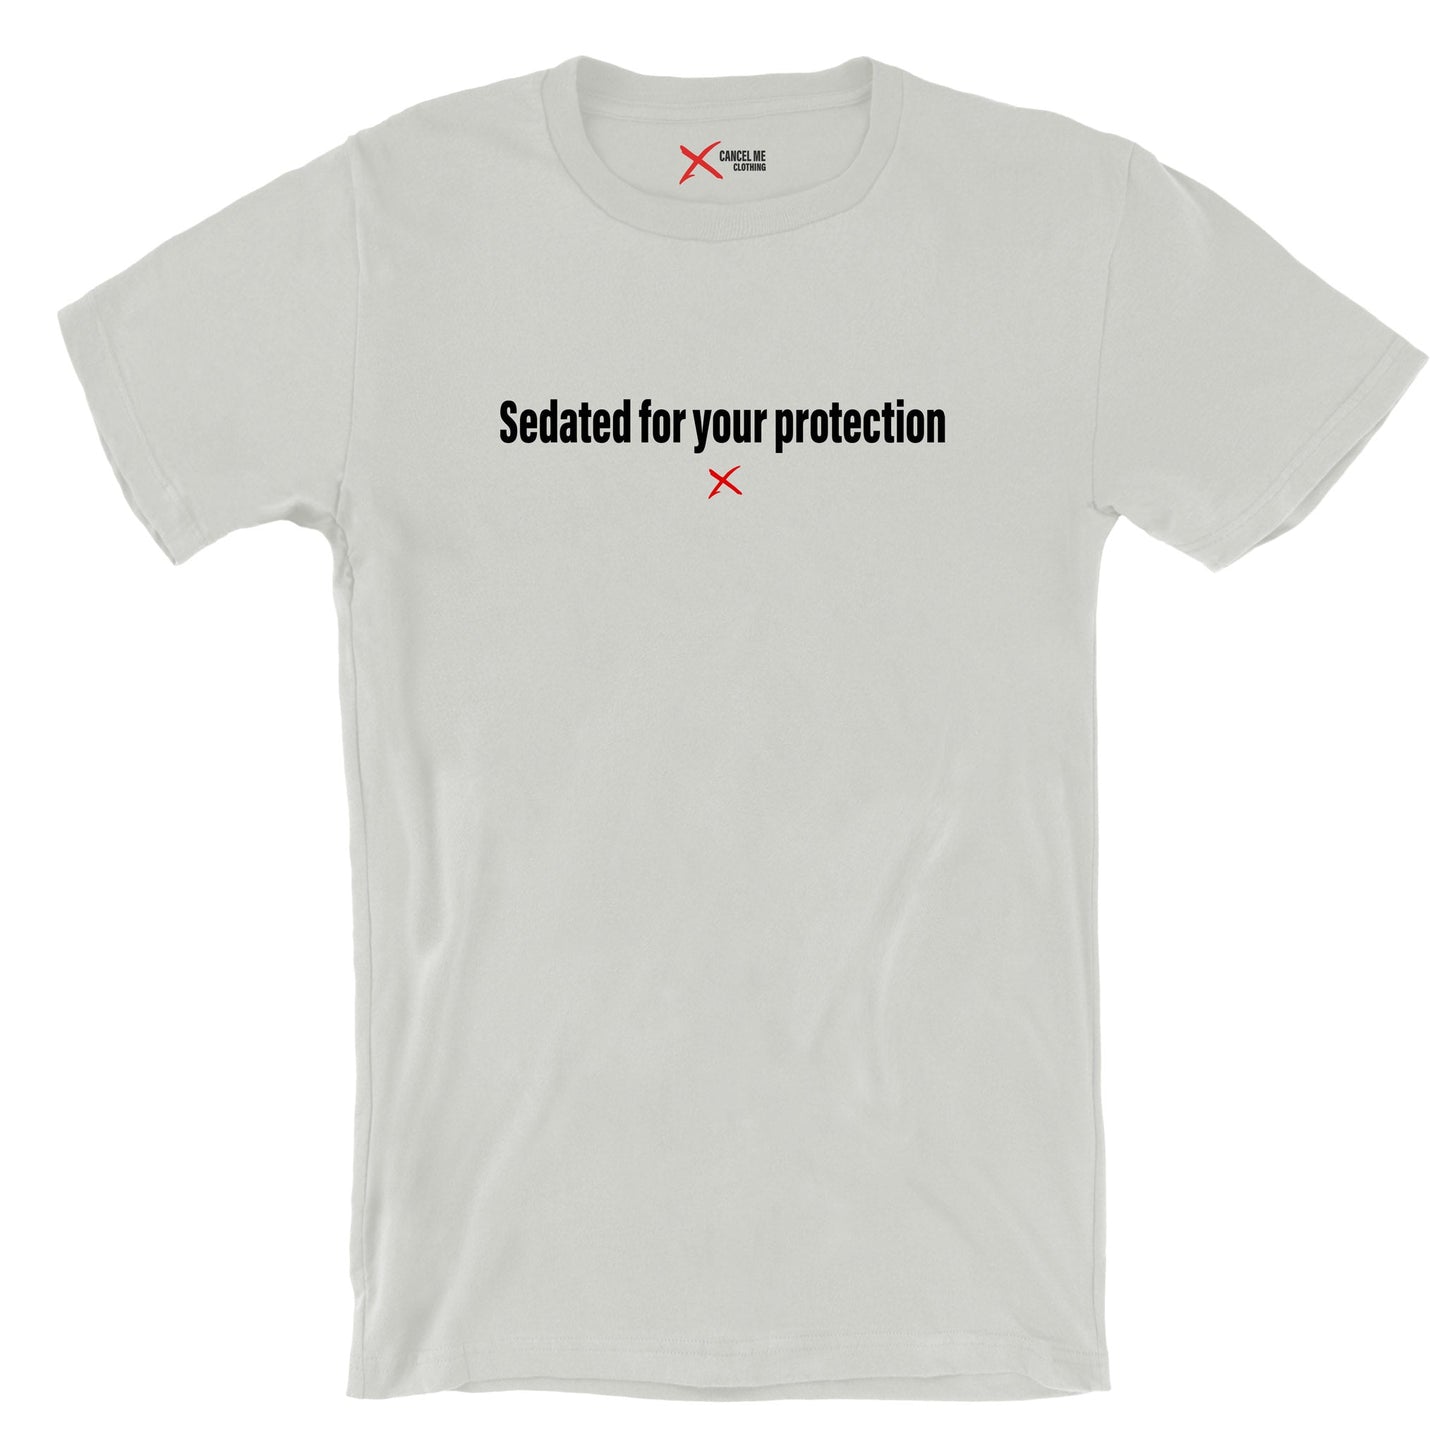 Sedated for your protection - Shirt